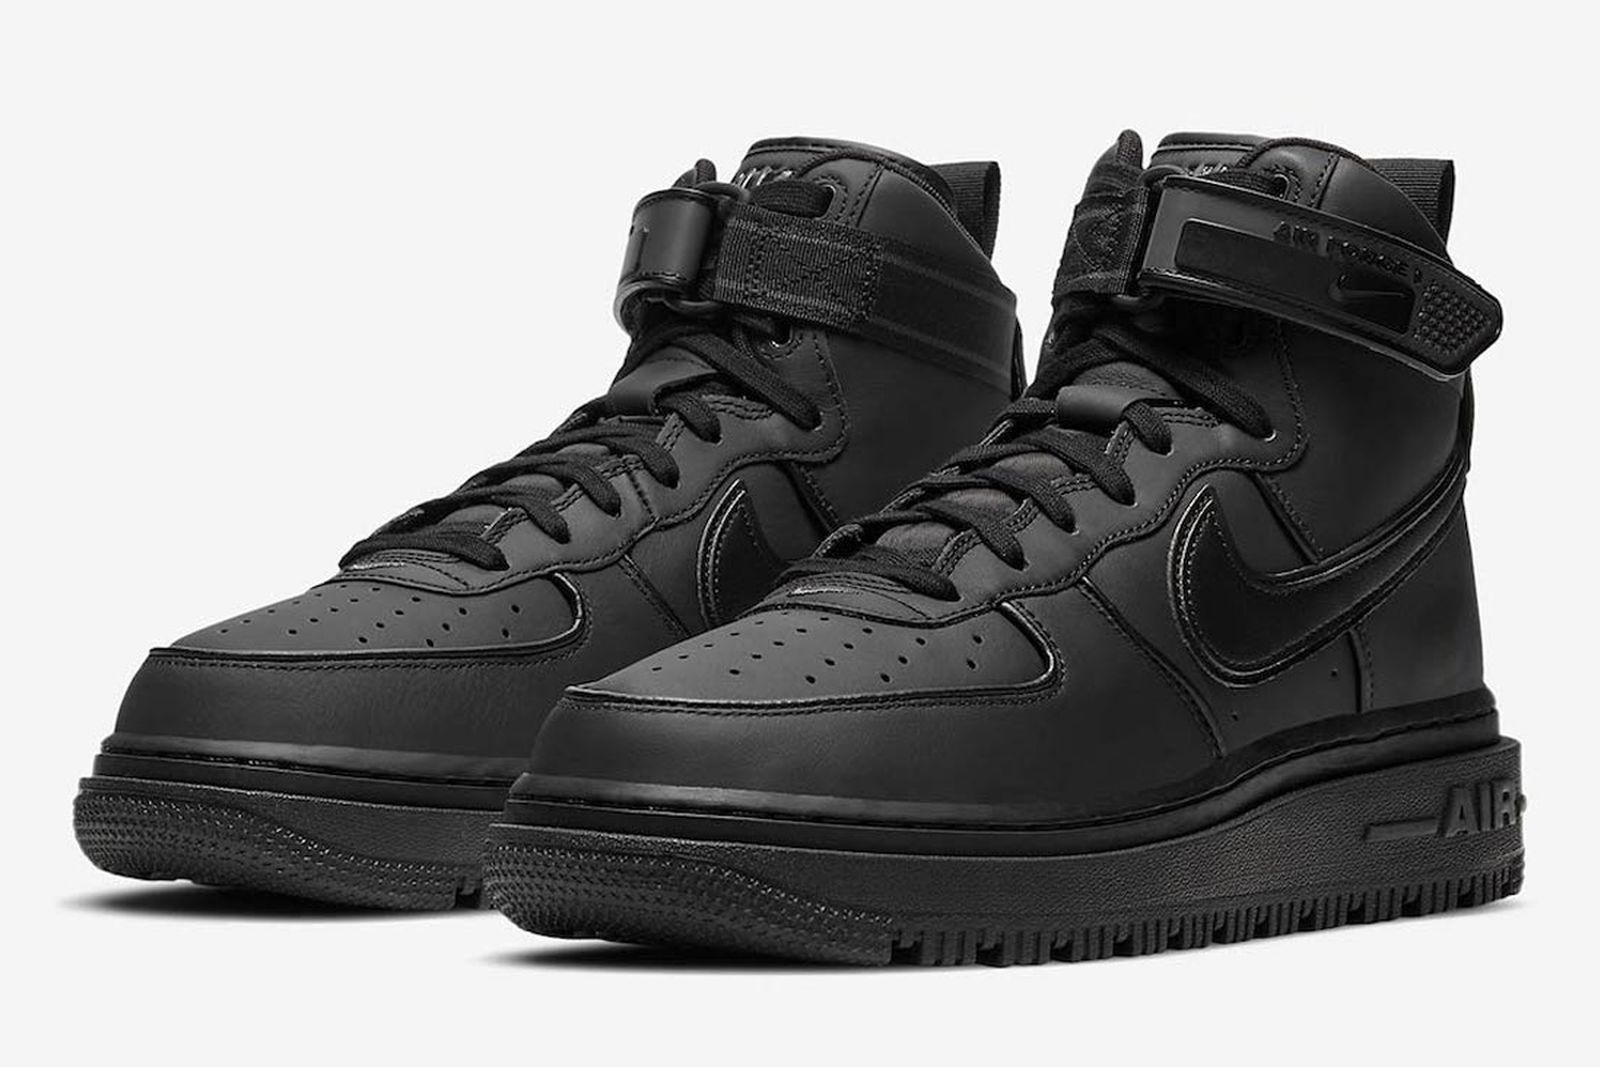 wearing black air forces meaning